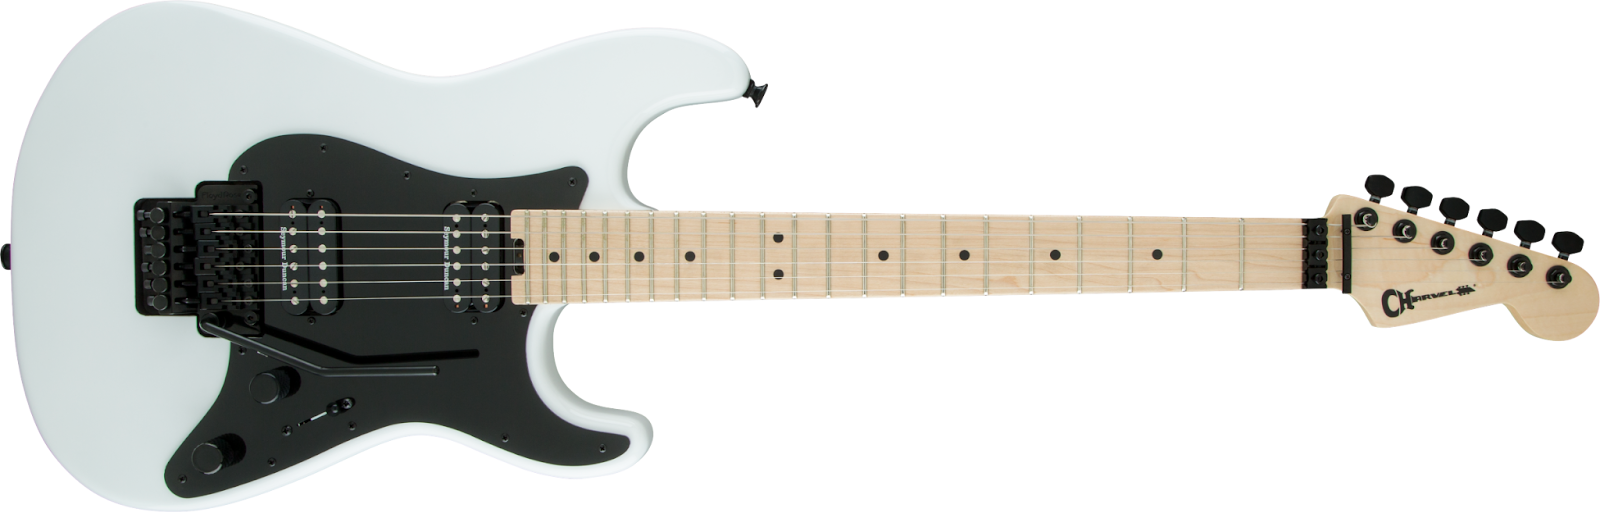 Charvel Pro Mod So-Cal Style 1 HH FR Electric Guitar under $1000/£1000.